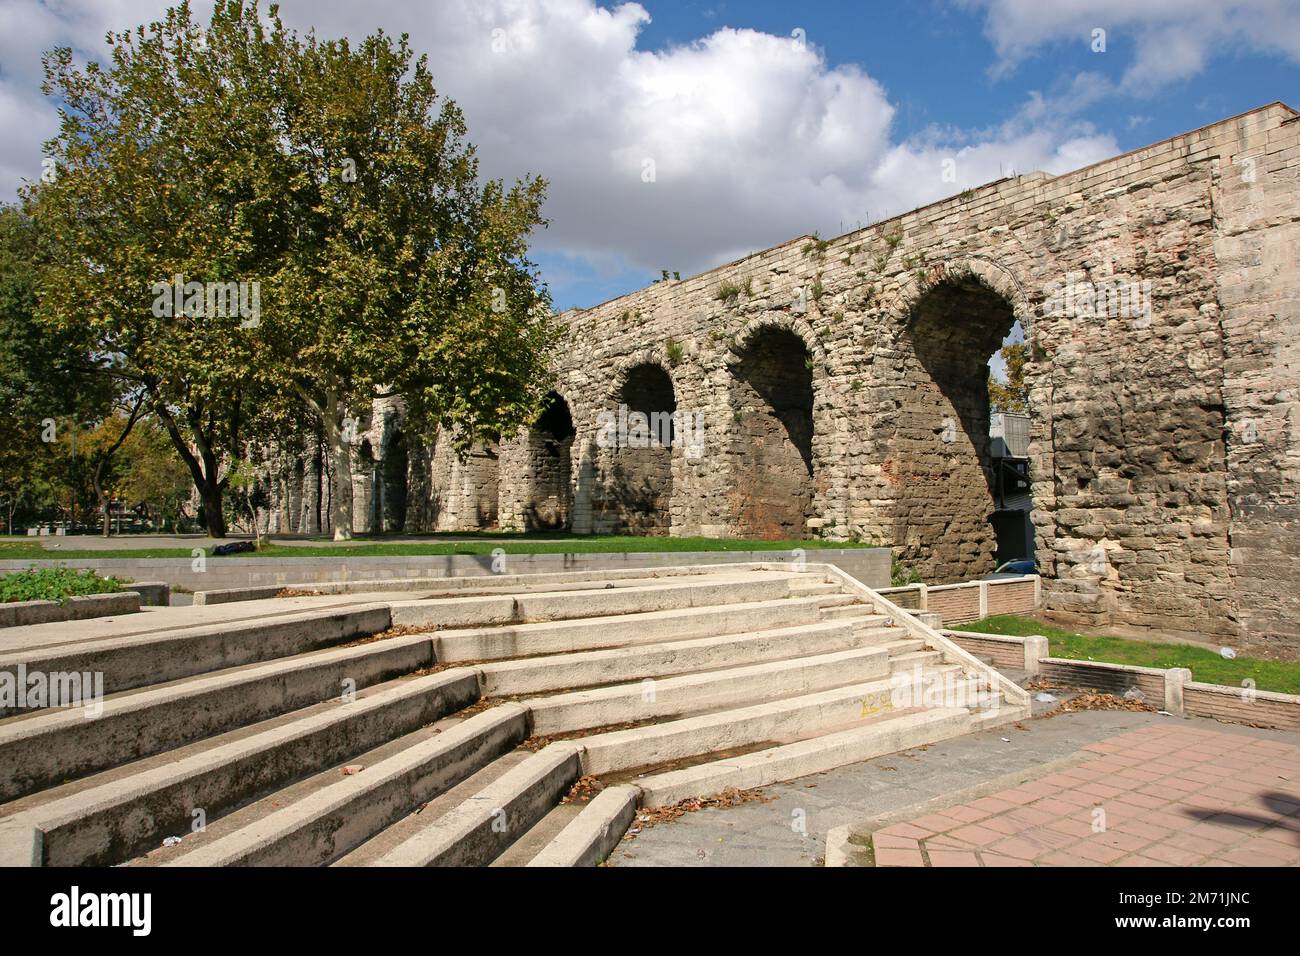 Located in Istanbul, Turkey, the Bozdogan Aqueduct was built during the Roman period. Stock Photo